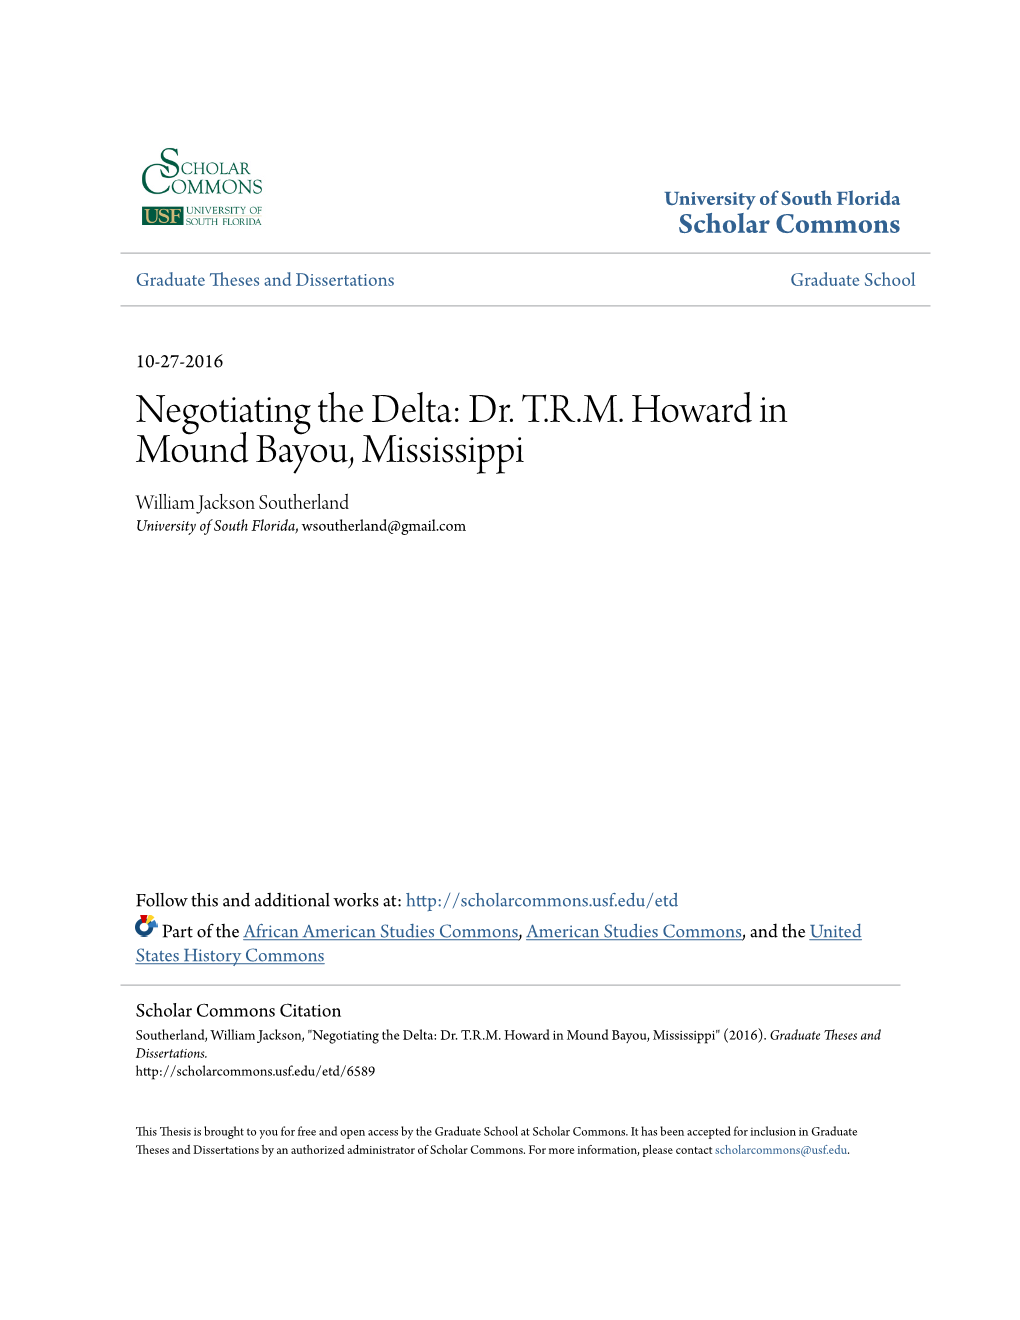 Negotiating the Delta: Dr. T.R.M. Howard in Mound Bayou, Mississippi William Jackson Southerland University of South Florida, Wsoutherland@Gmail.Com